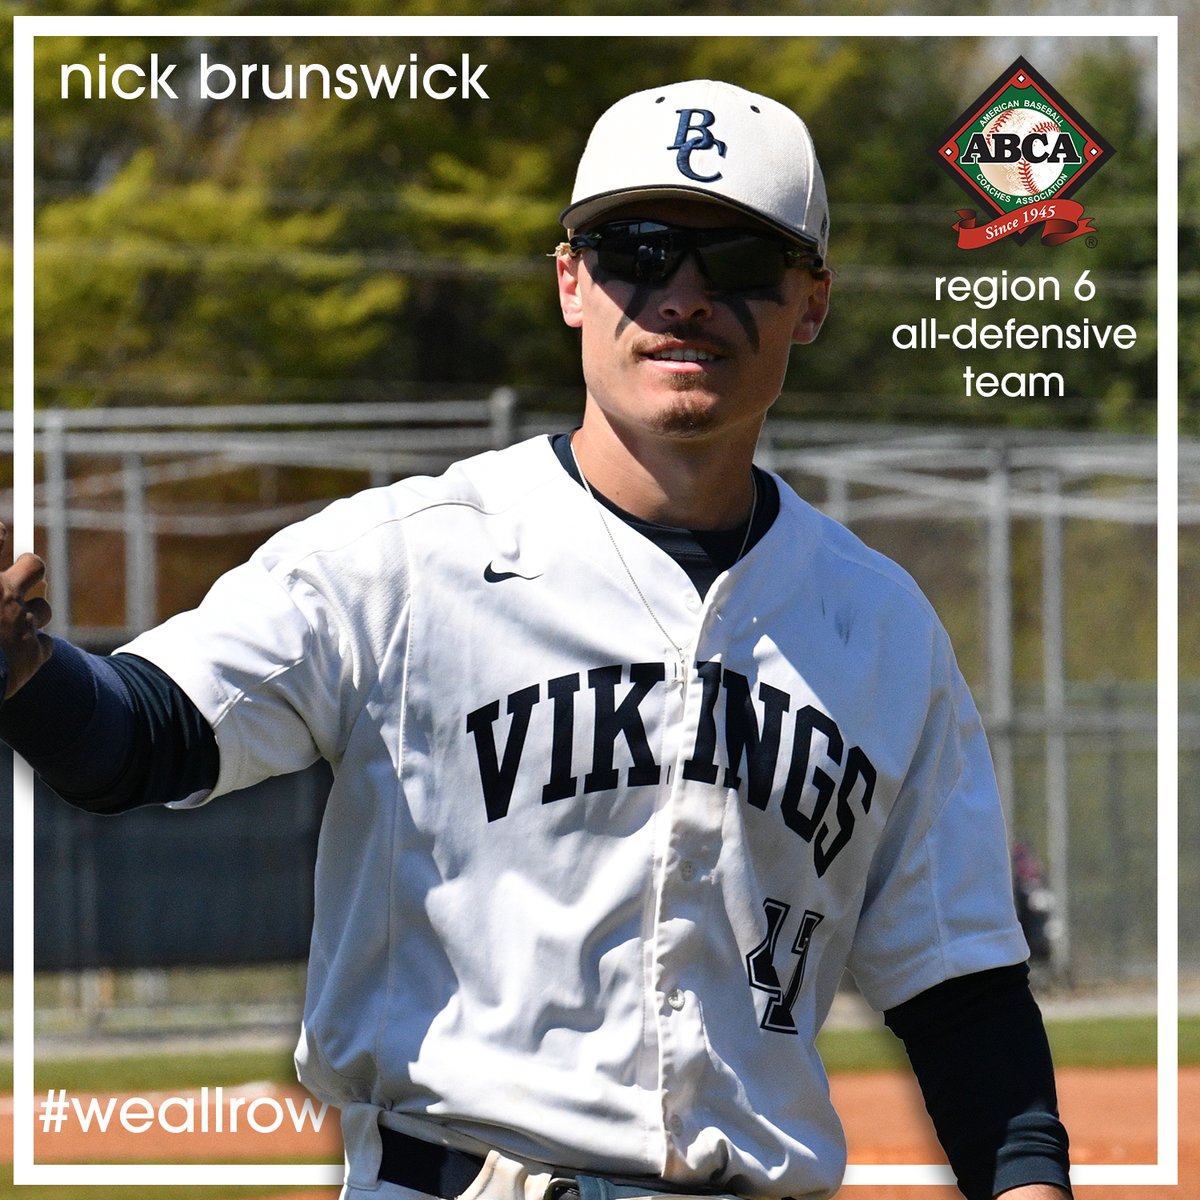 Nick Brunswick has been named to the @ABCA1945  Division III Region 6 All-Defensive Team! #WeAllRow